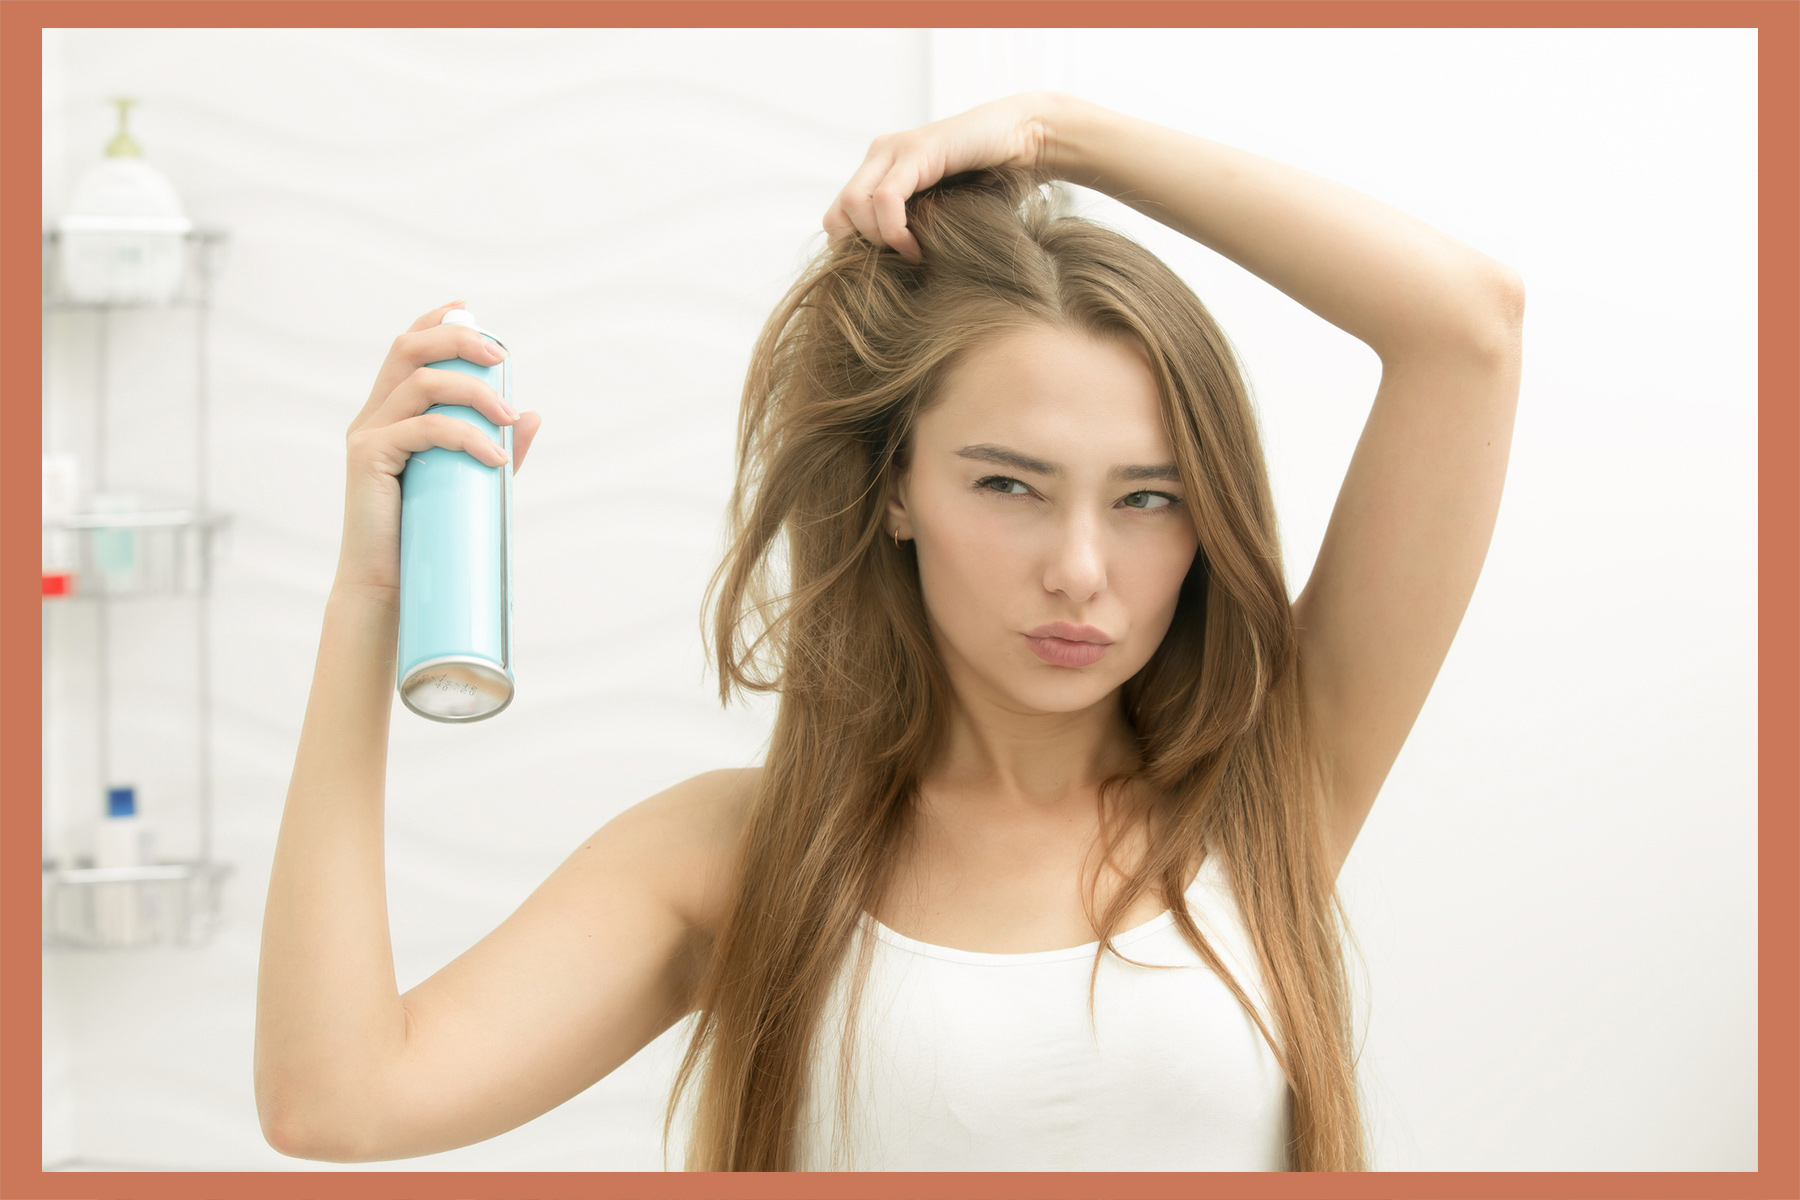 Is Dry Shampoo Bad For Your Hair? Here's What You Need to KnowHelloGiggles